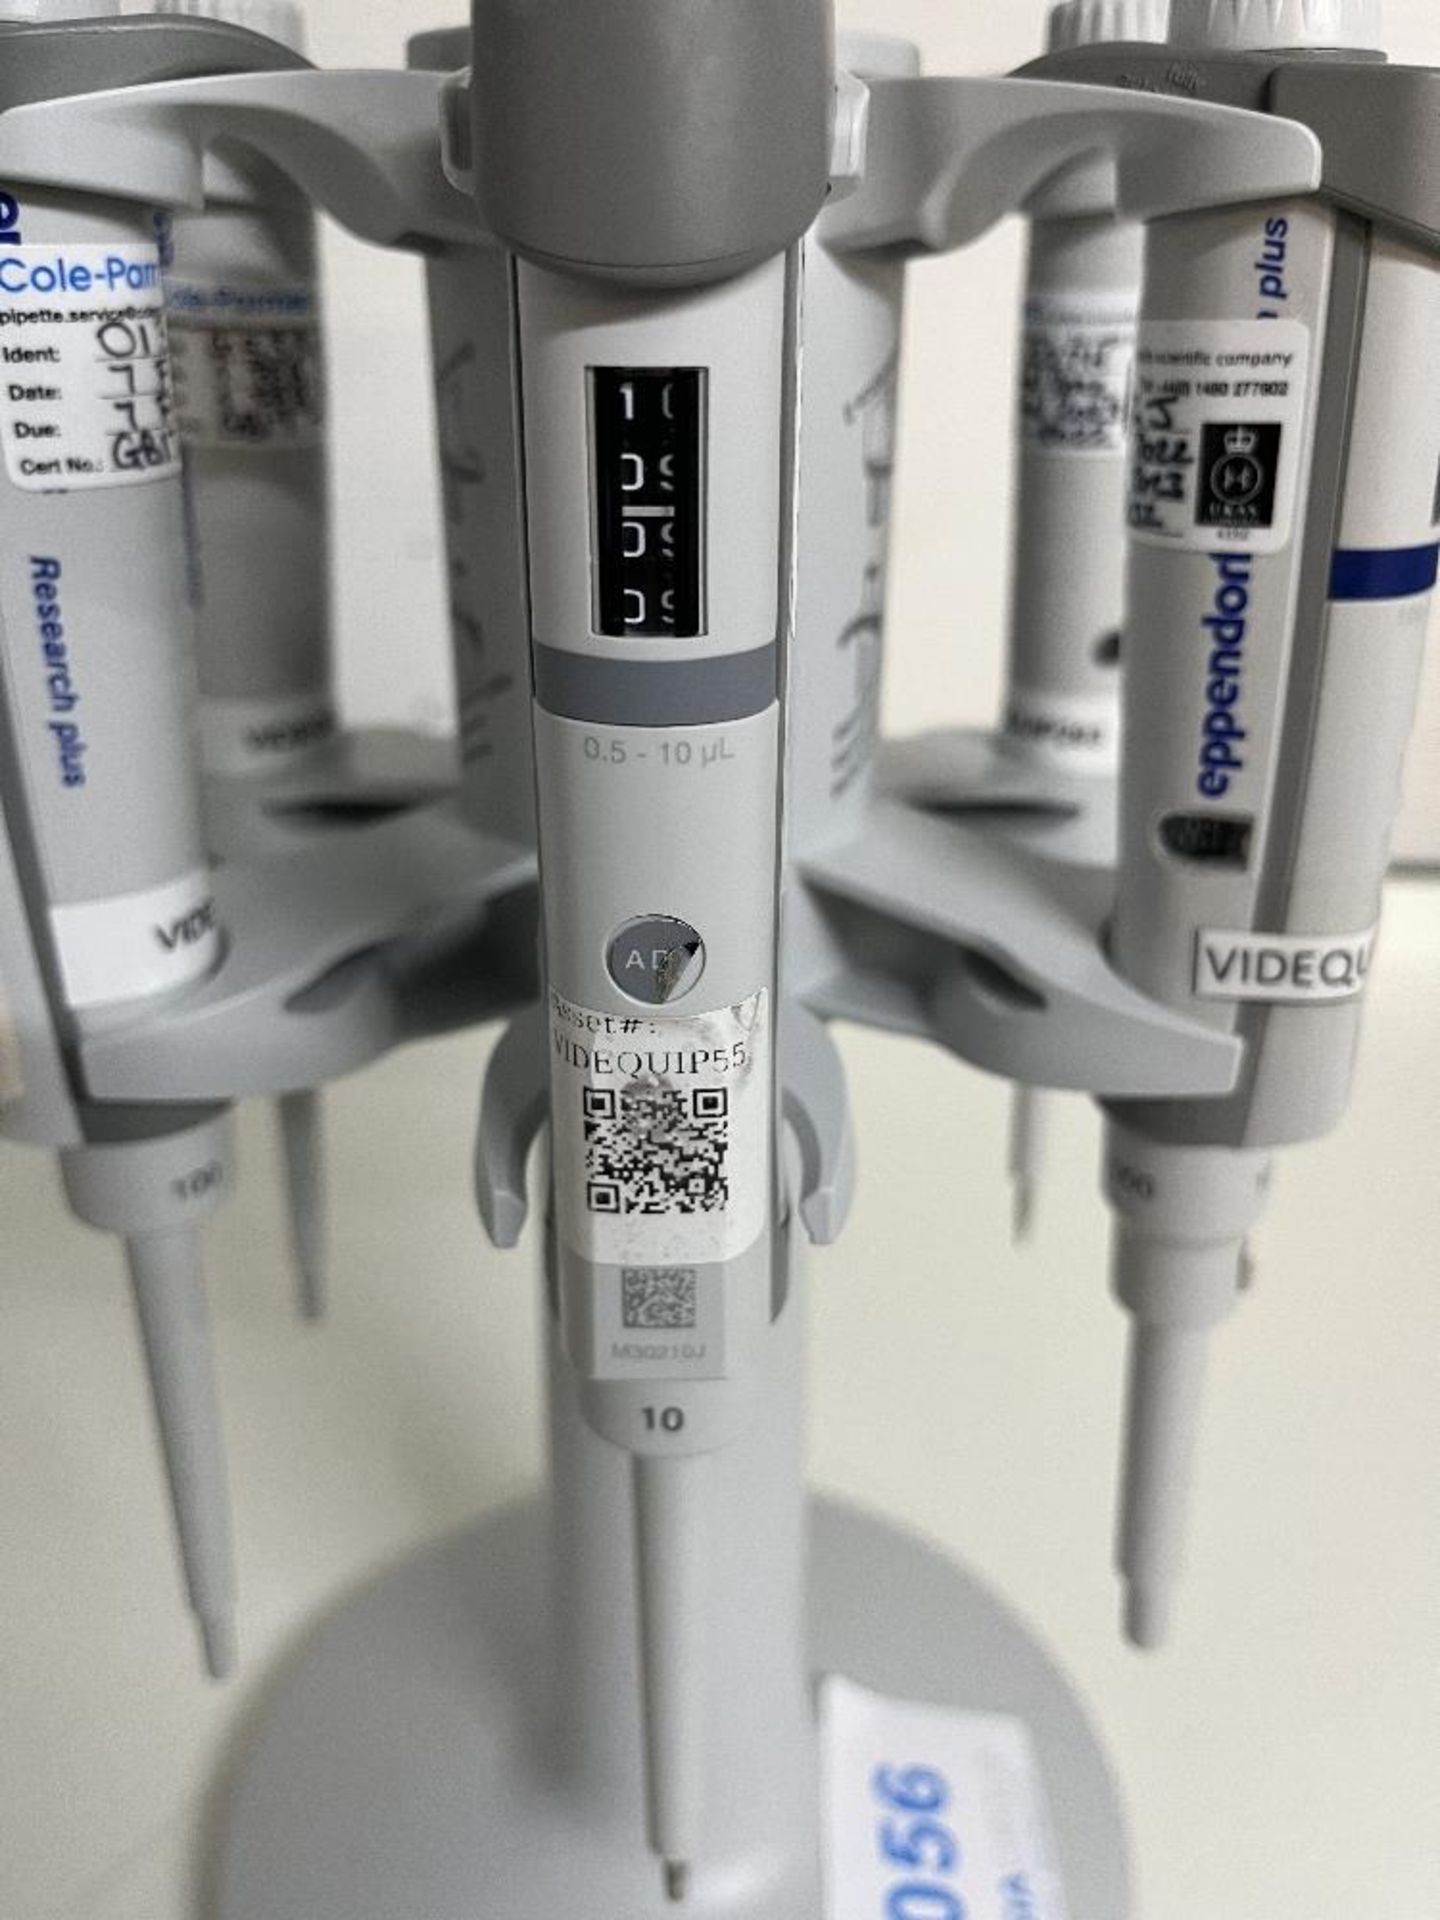 Eppendorf Pipette Carousel 2 with (6) Adjustable Volume Pipettes - Image 8 of 8